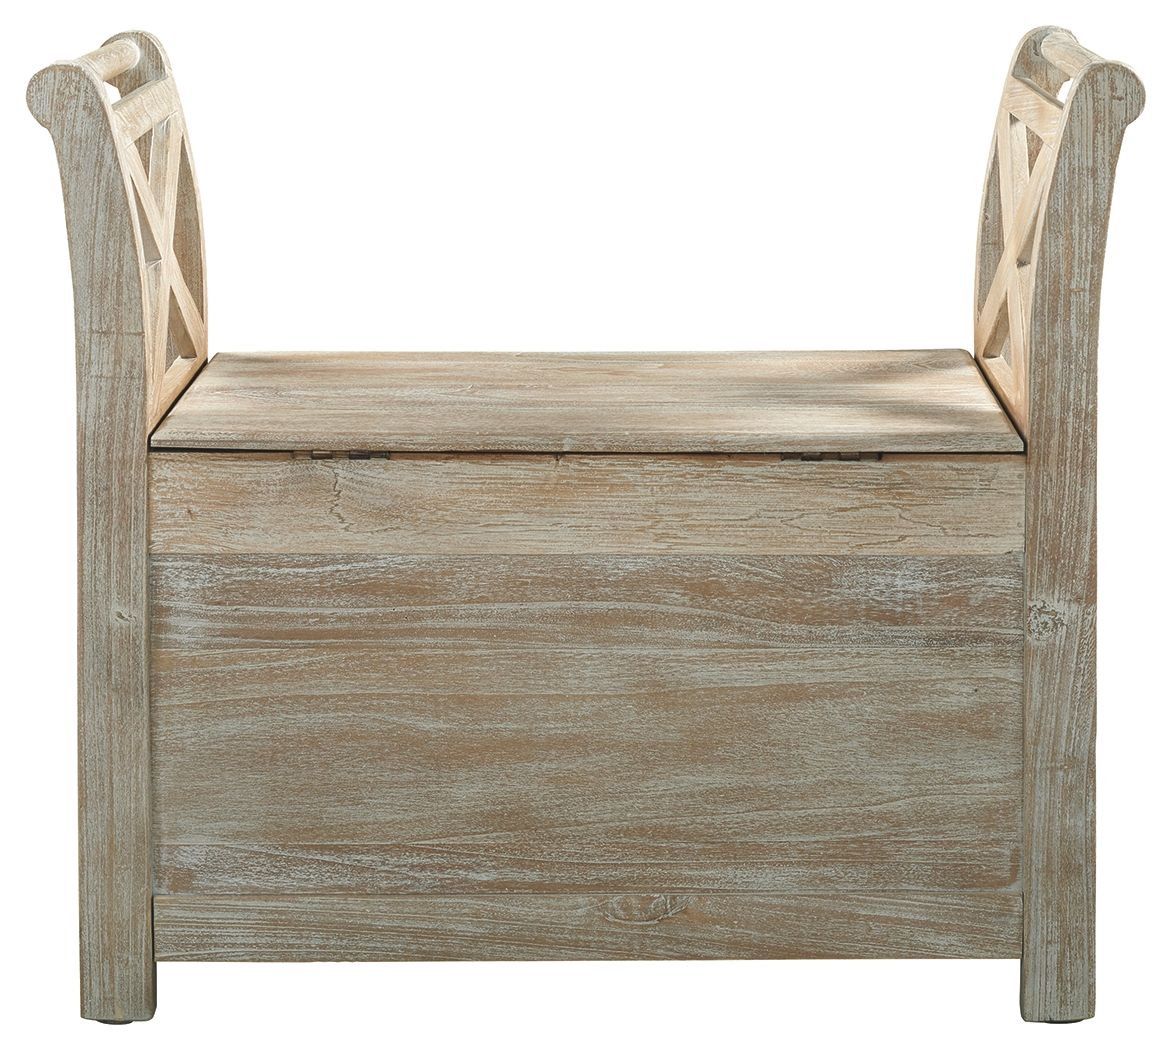 Fossil - Whitewash - Accent Bench - Tony's Home Furnishings